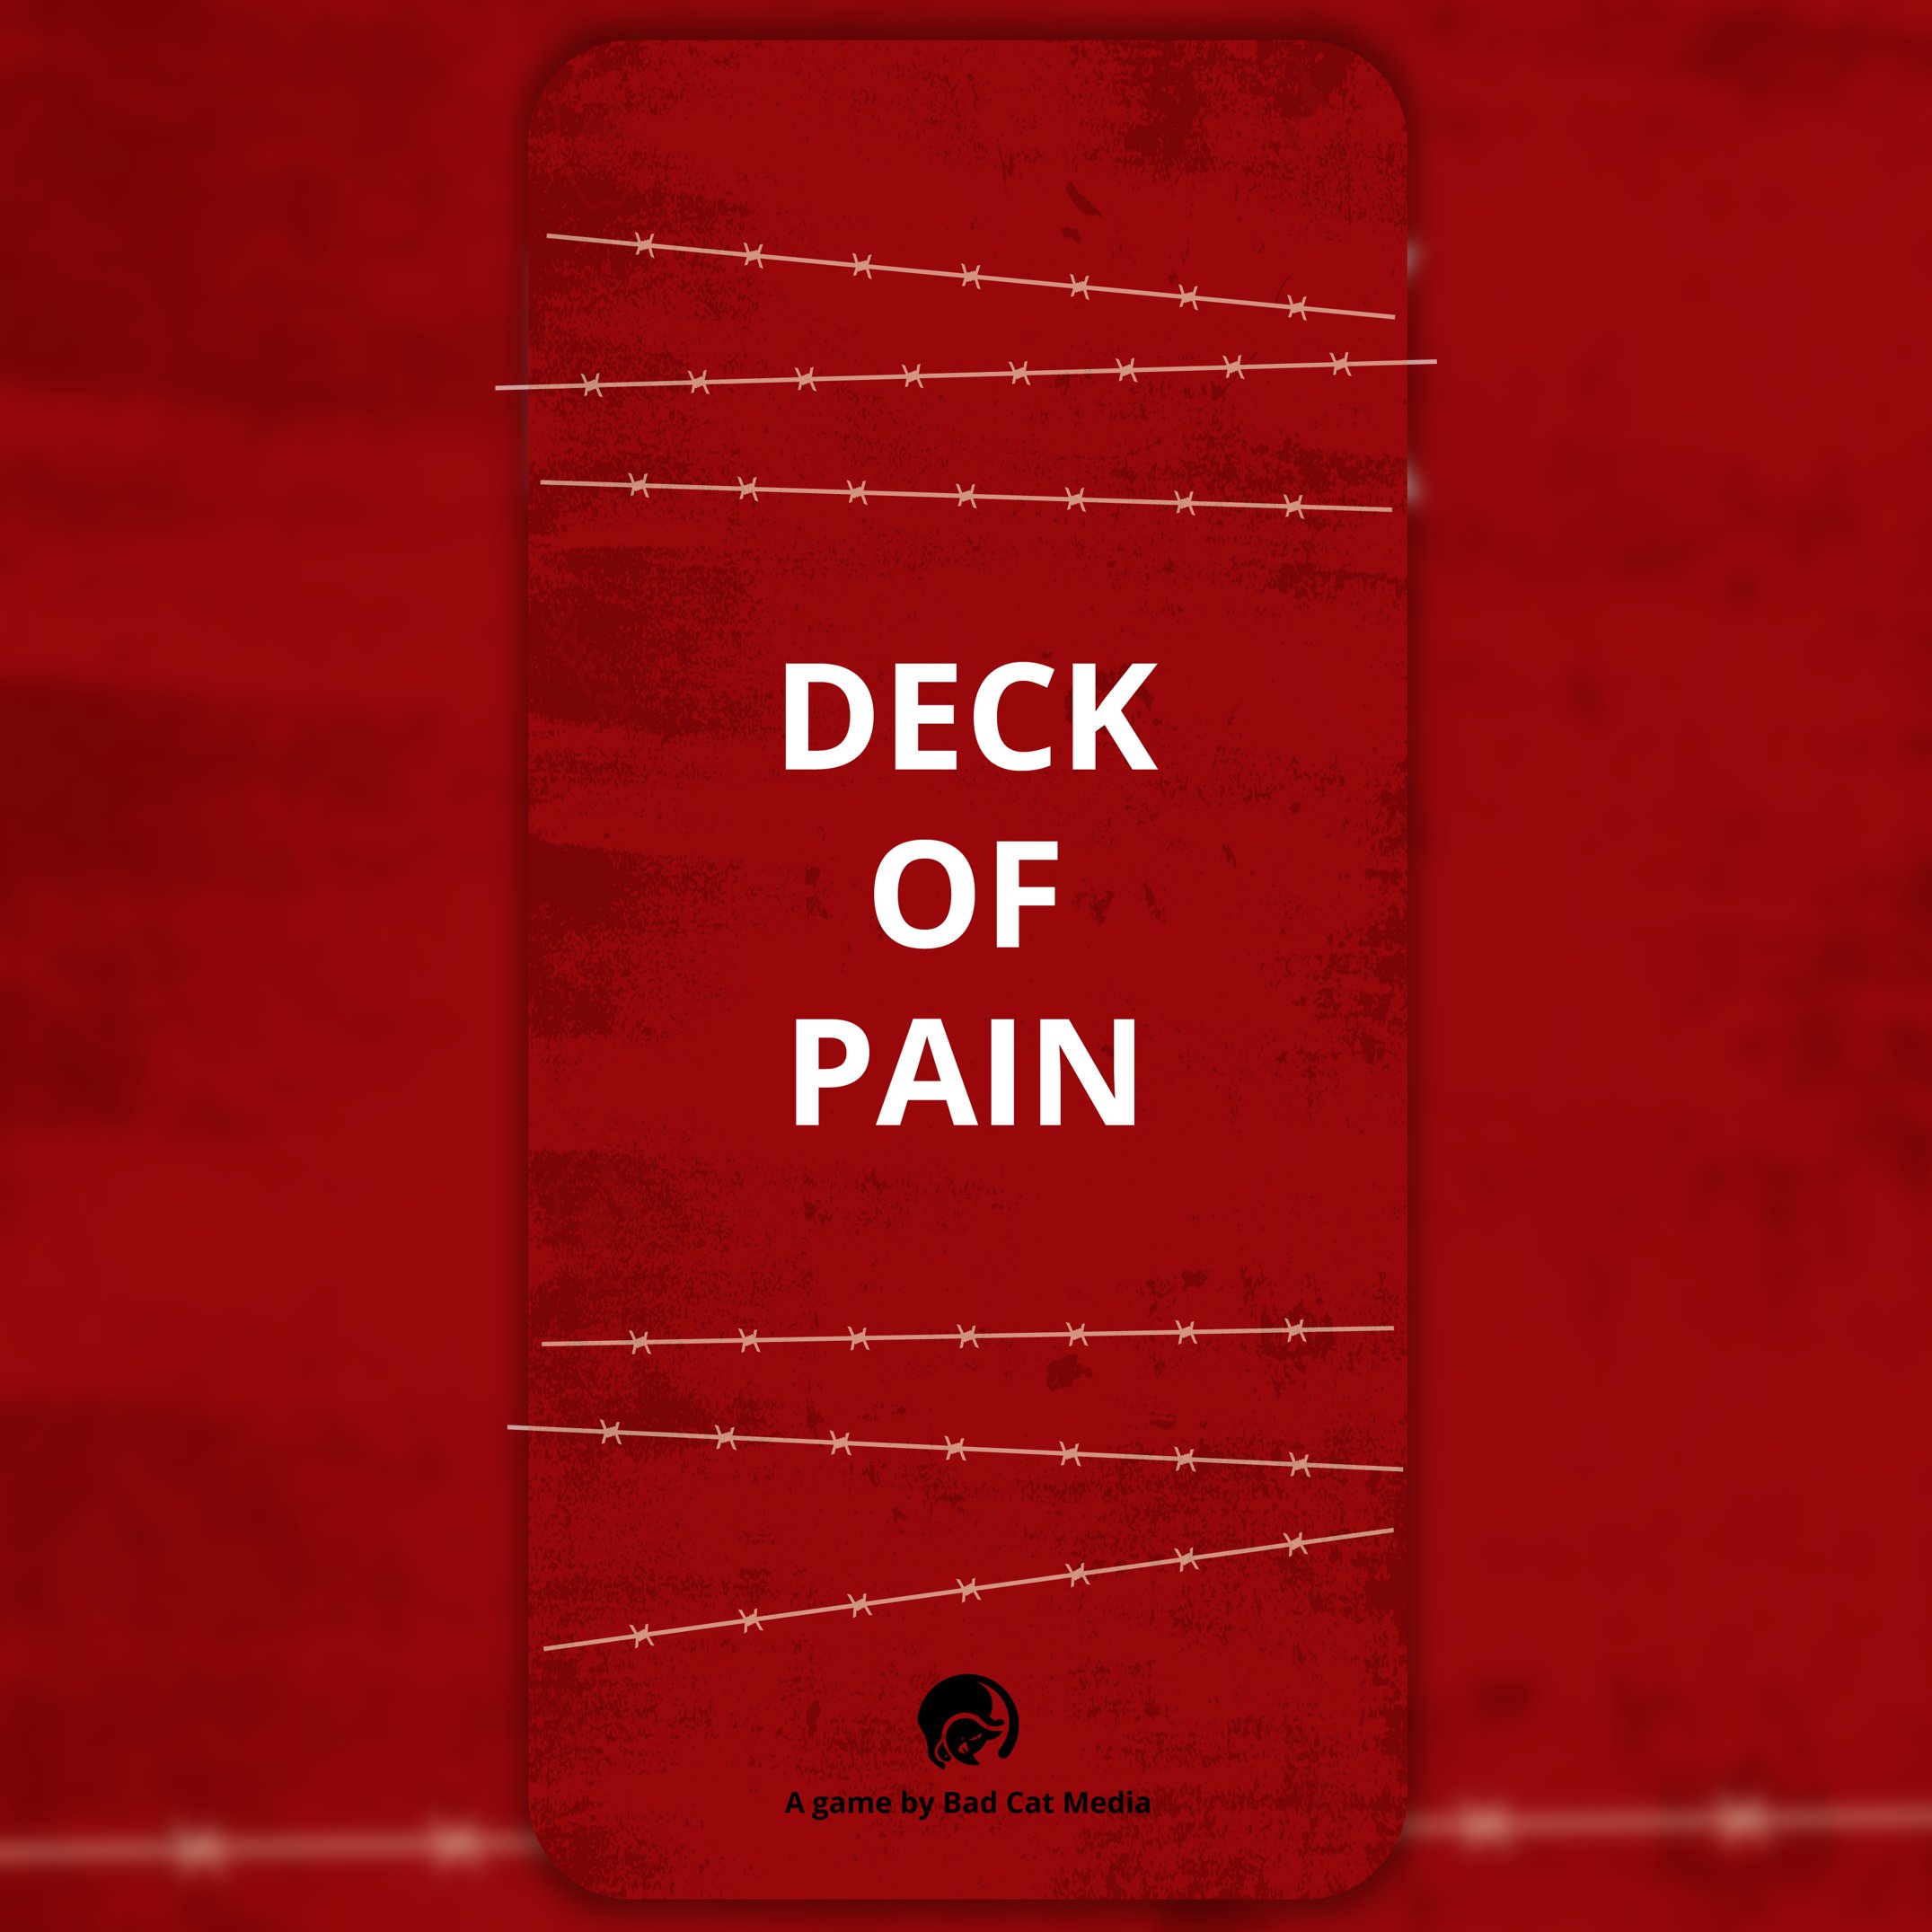 Project Deck of Pain app image